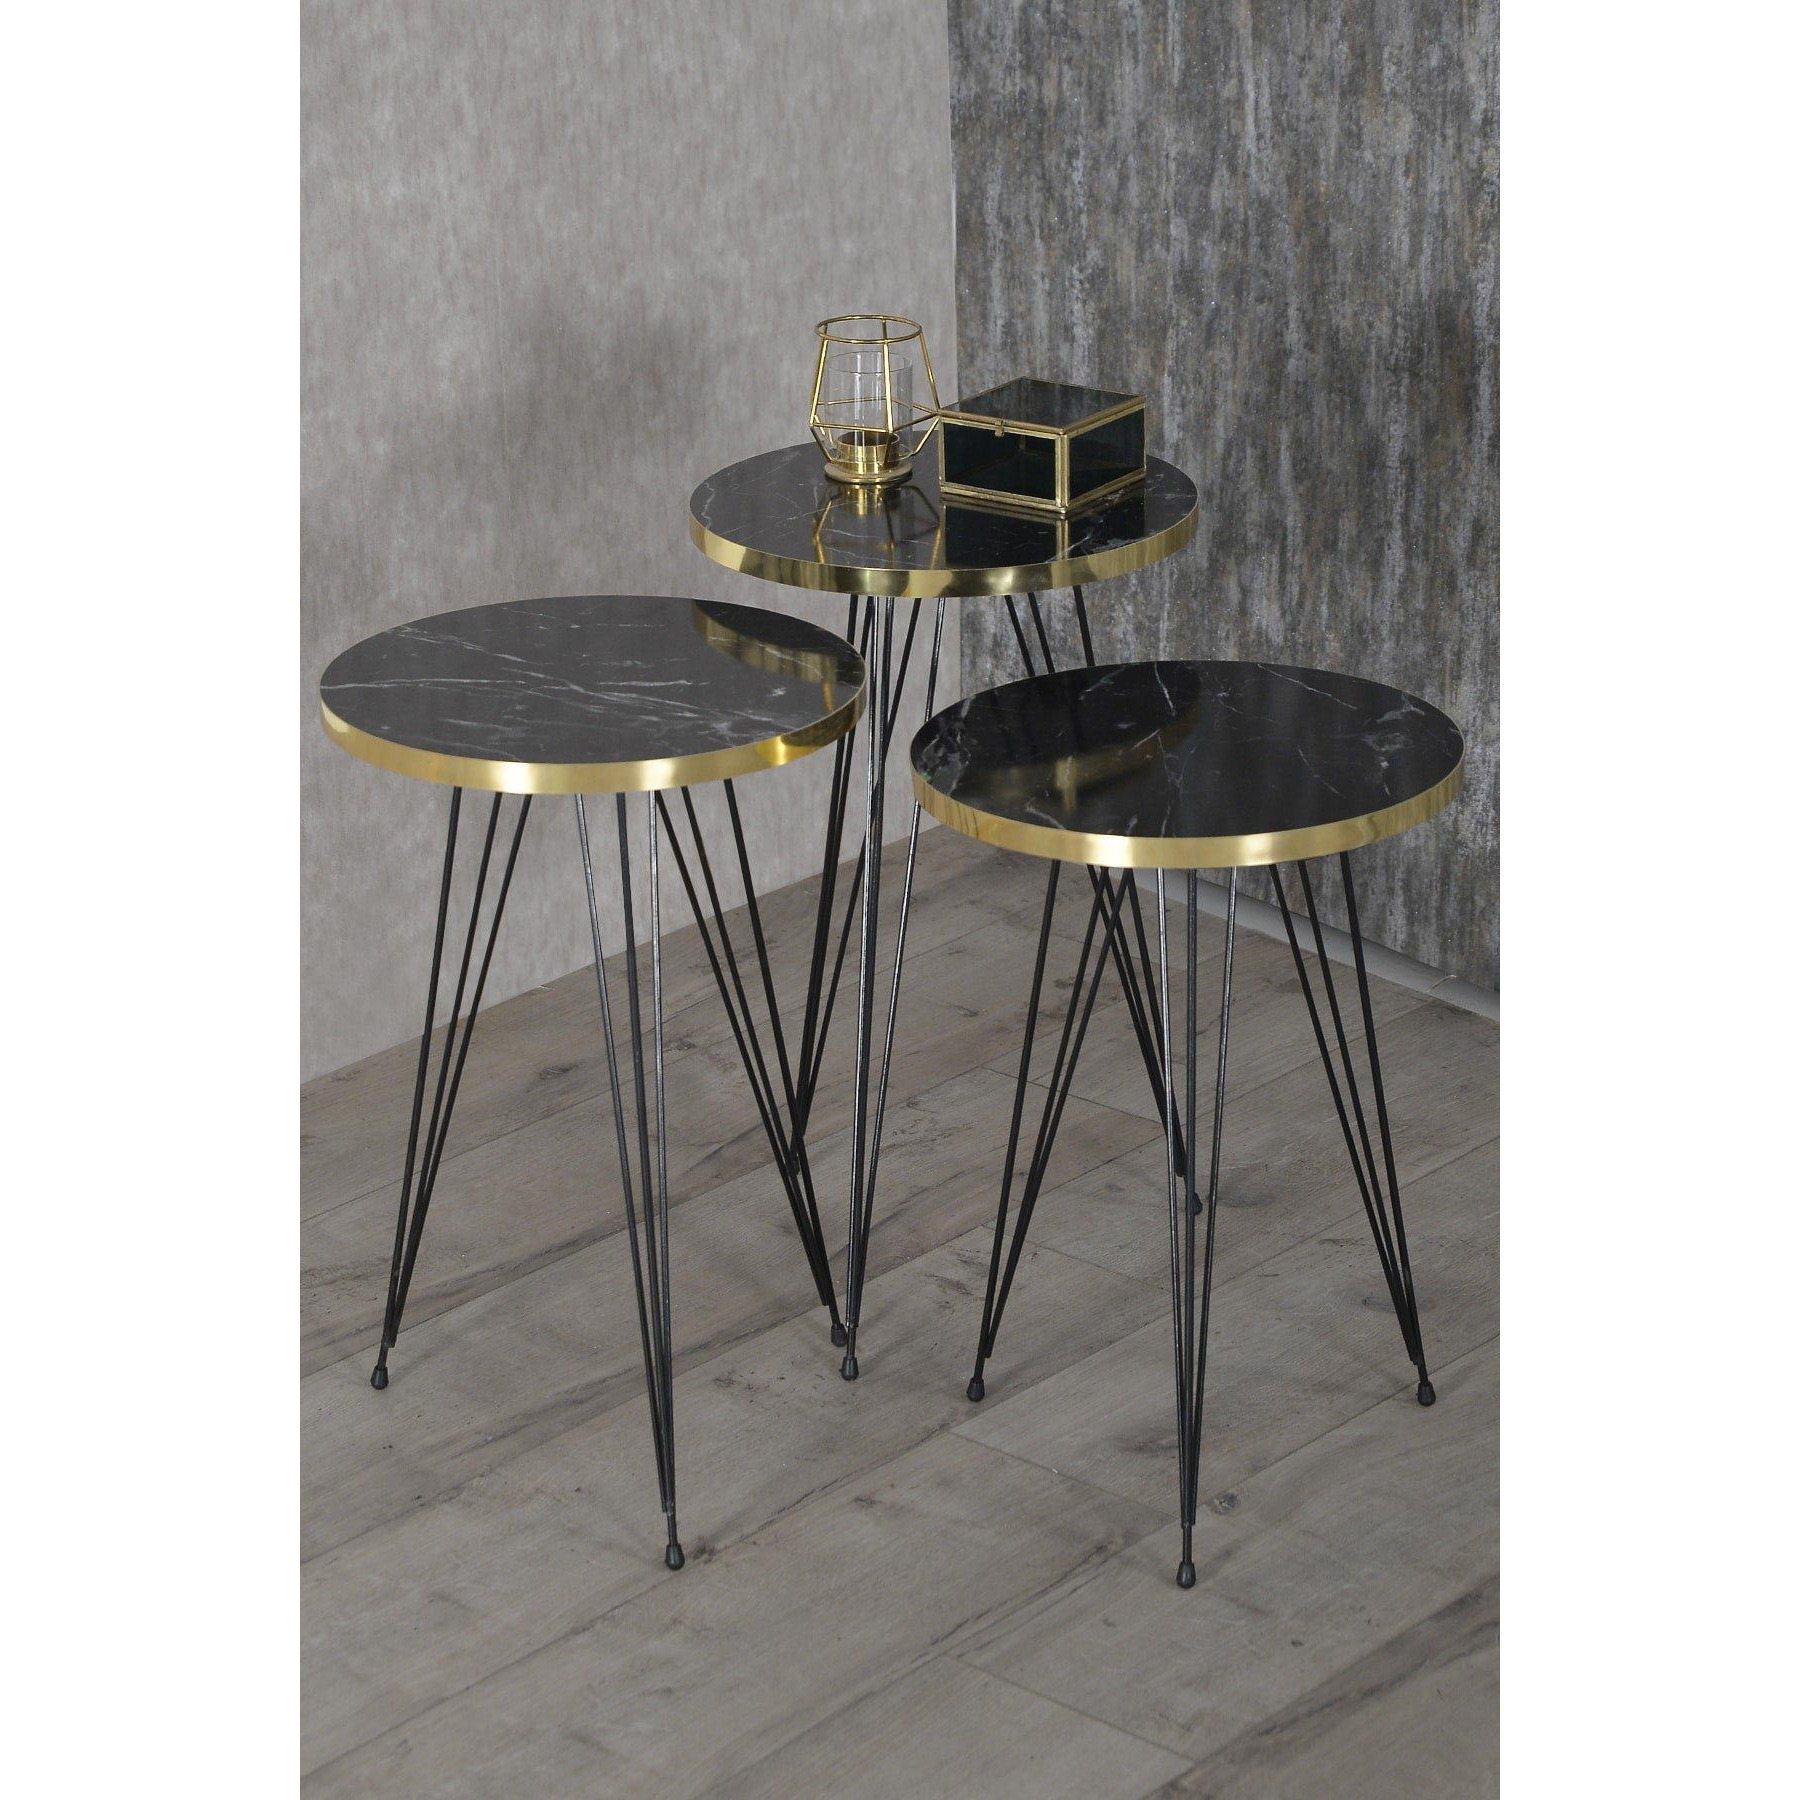 Black and gold round nesting tables - image 1